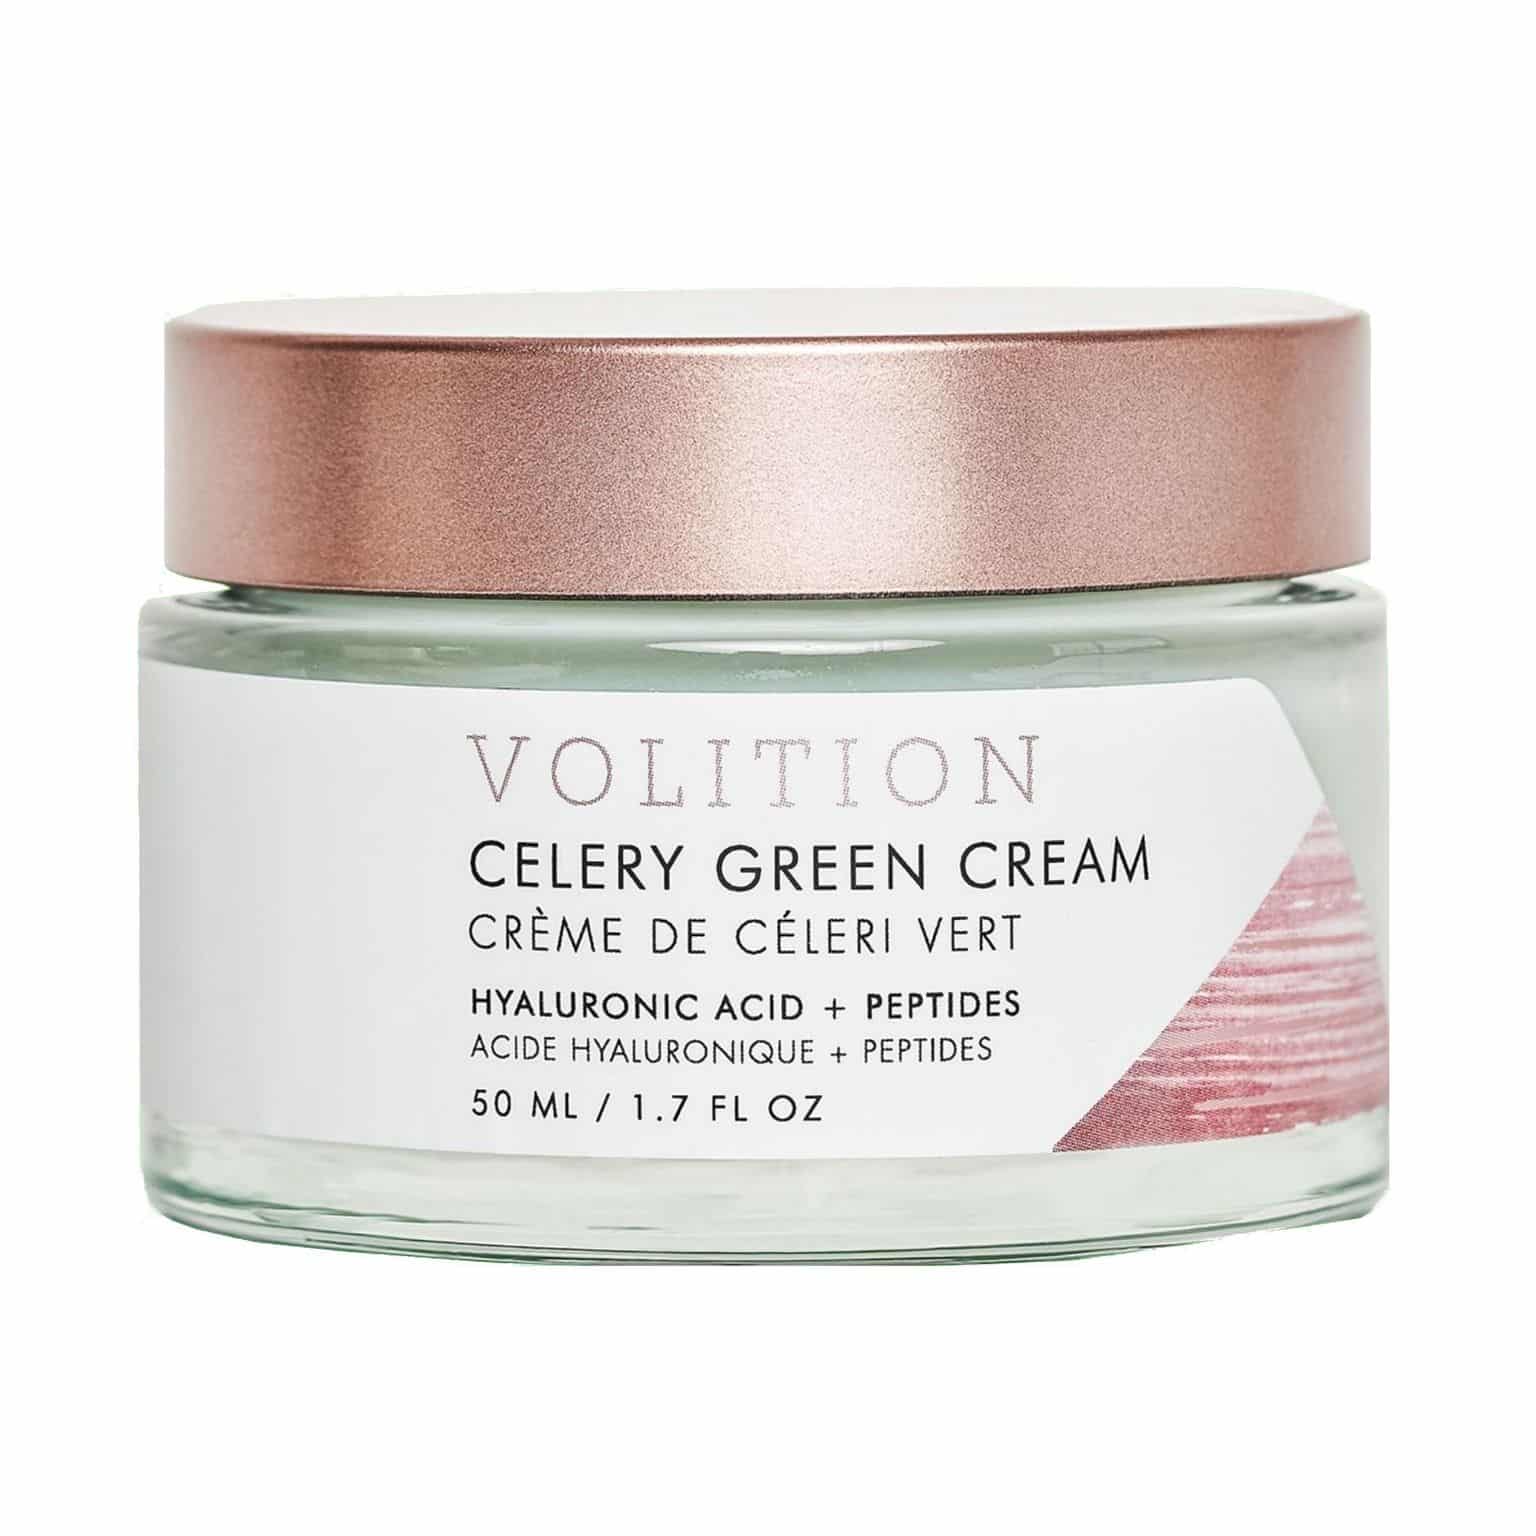 Volition Beauty Celery Green Cream With Hyaluronic Acid + Peptides